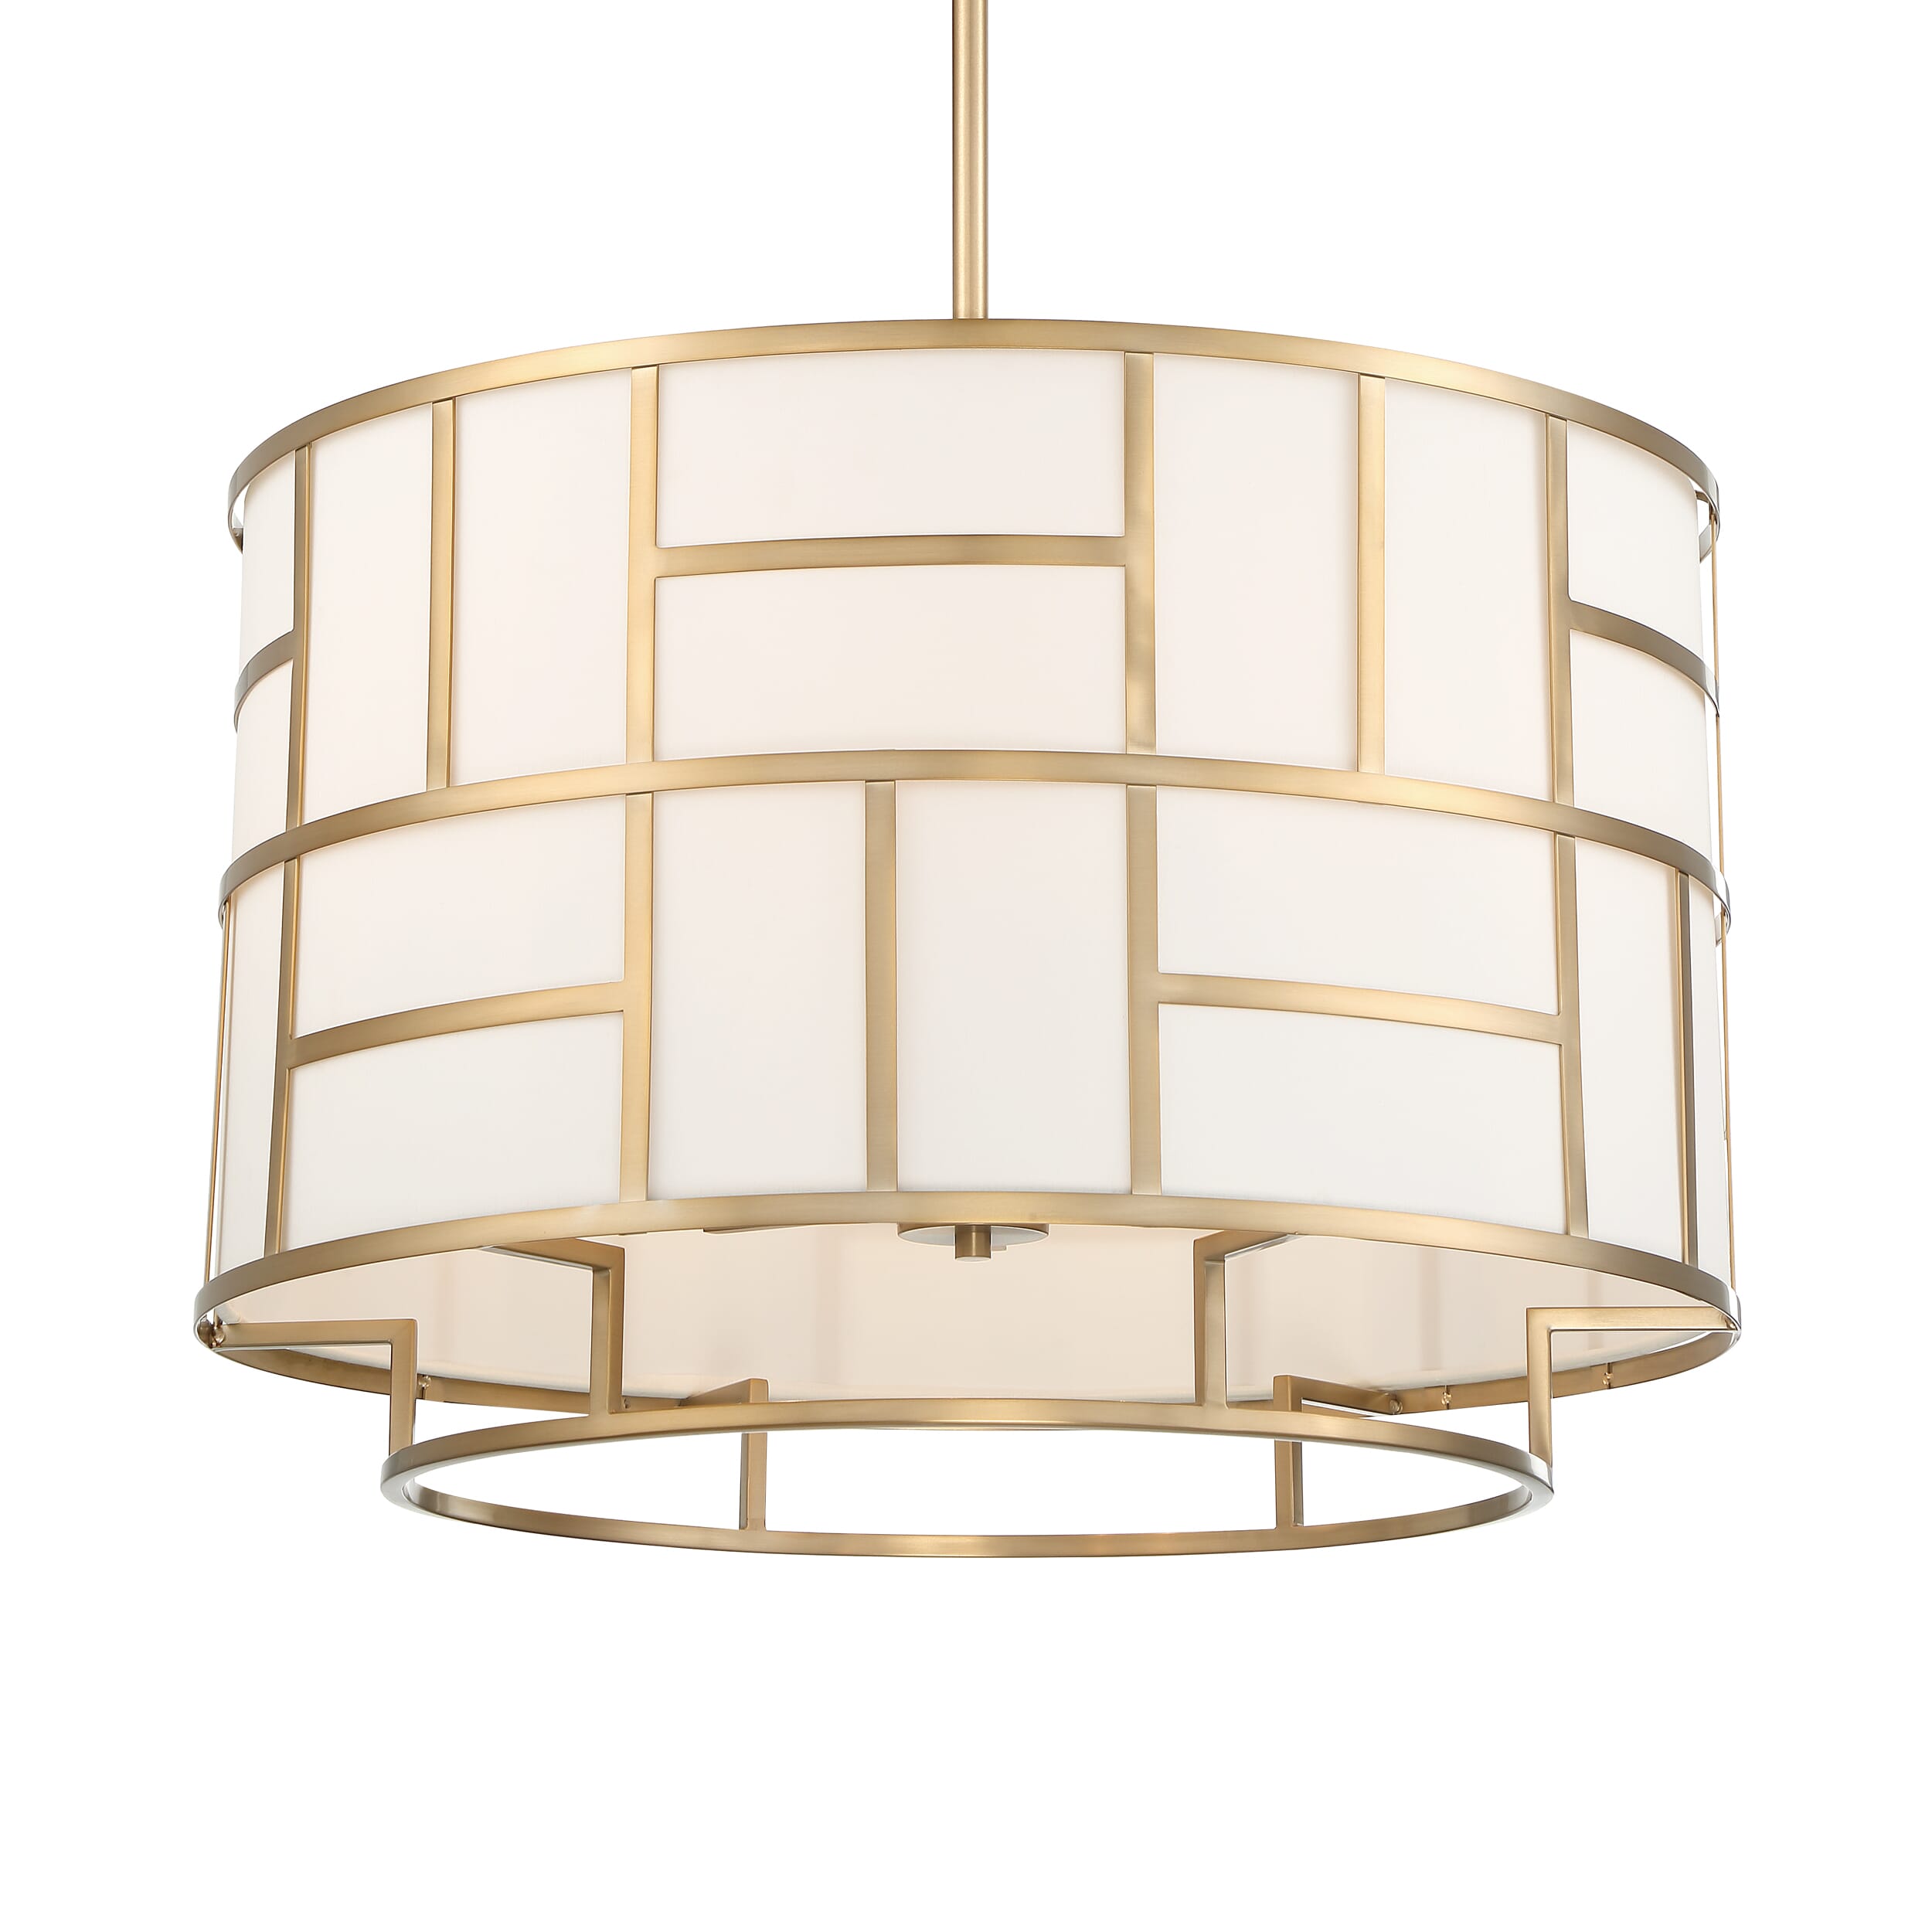 Libby Langdon for Crystorama Danielson 17" Chandelier in Vibrant Gold